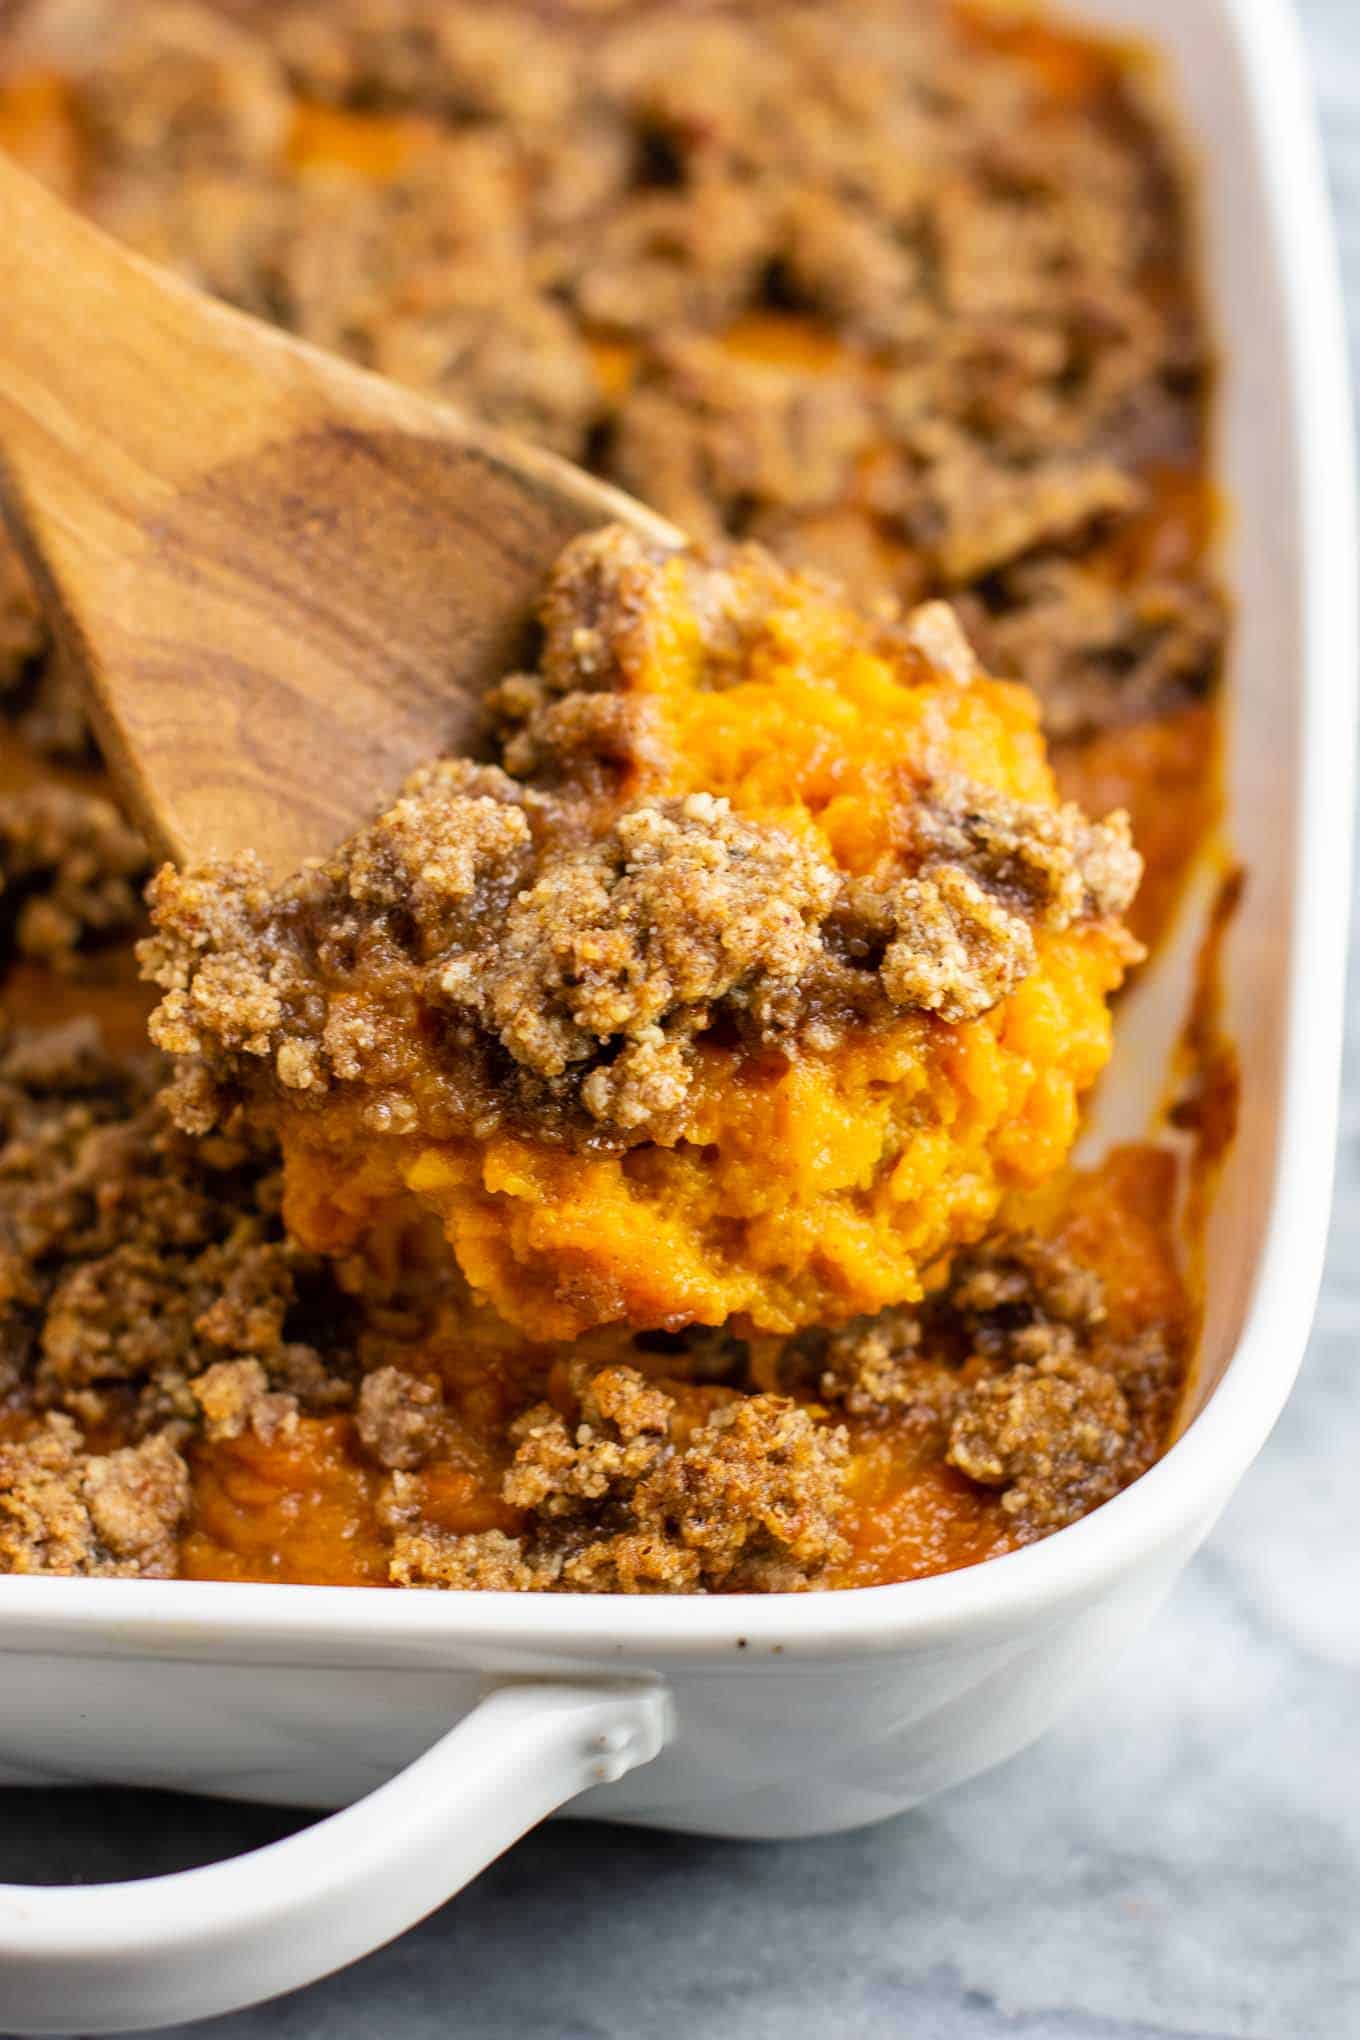 vegetarian thanksgiving menu - Sweet potato casserole with pecan topping - This tastes incredible and everyone loves it! #sweetpotatocasserole #thanksgiving #pecans #glutenfree #vegetarian